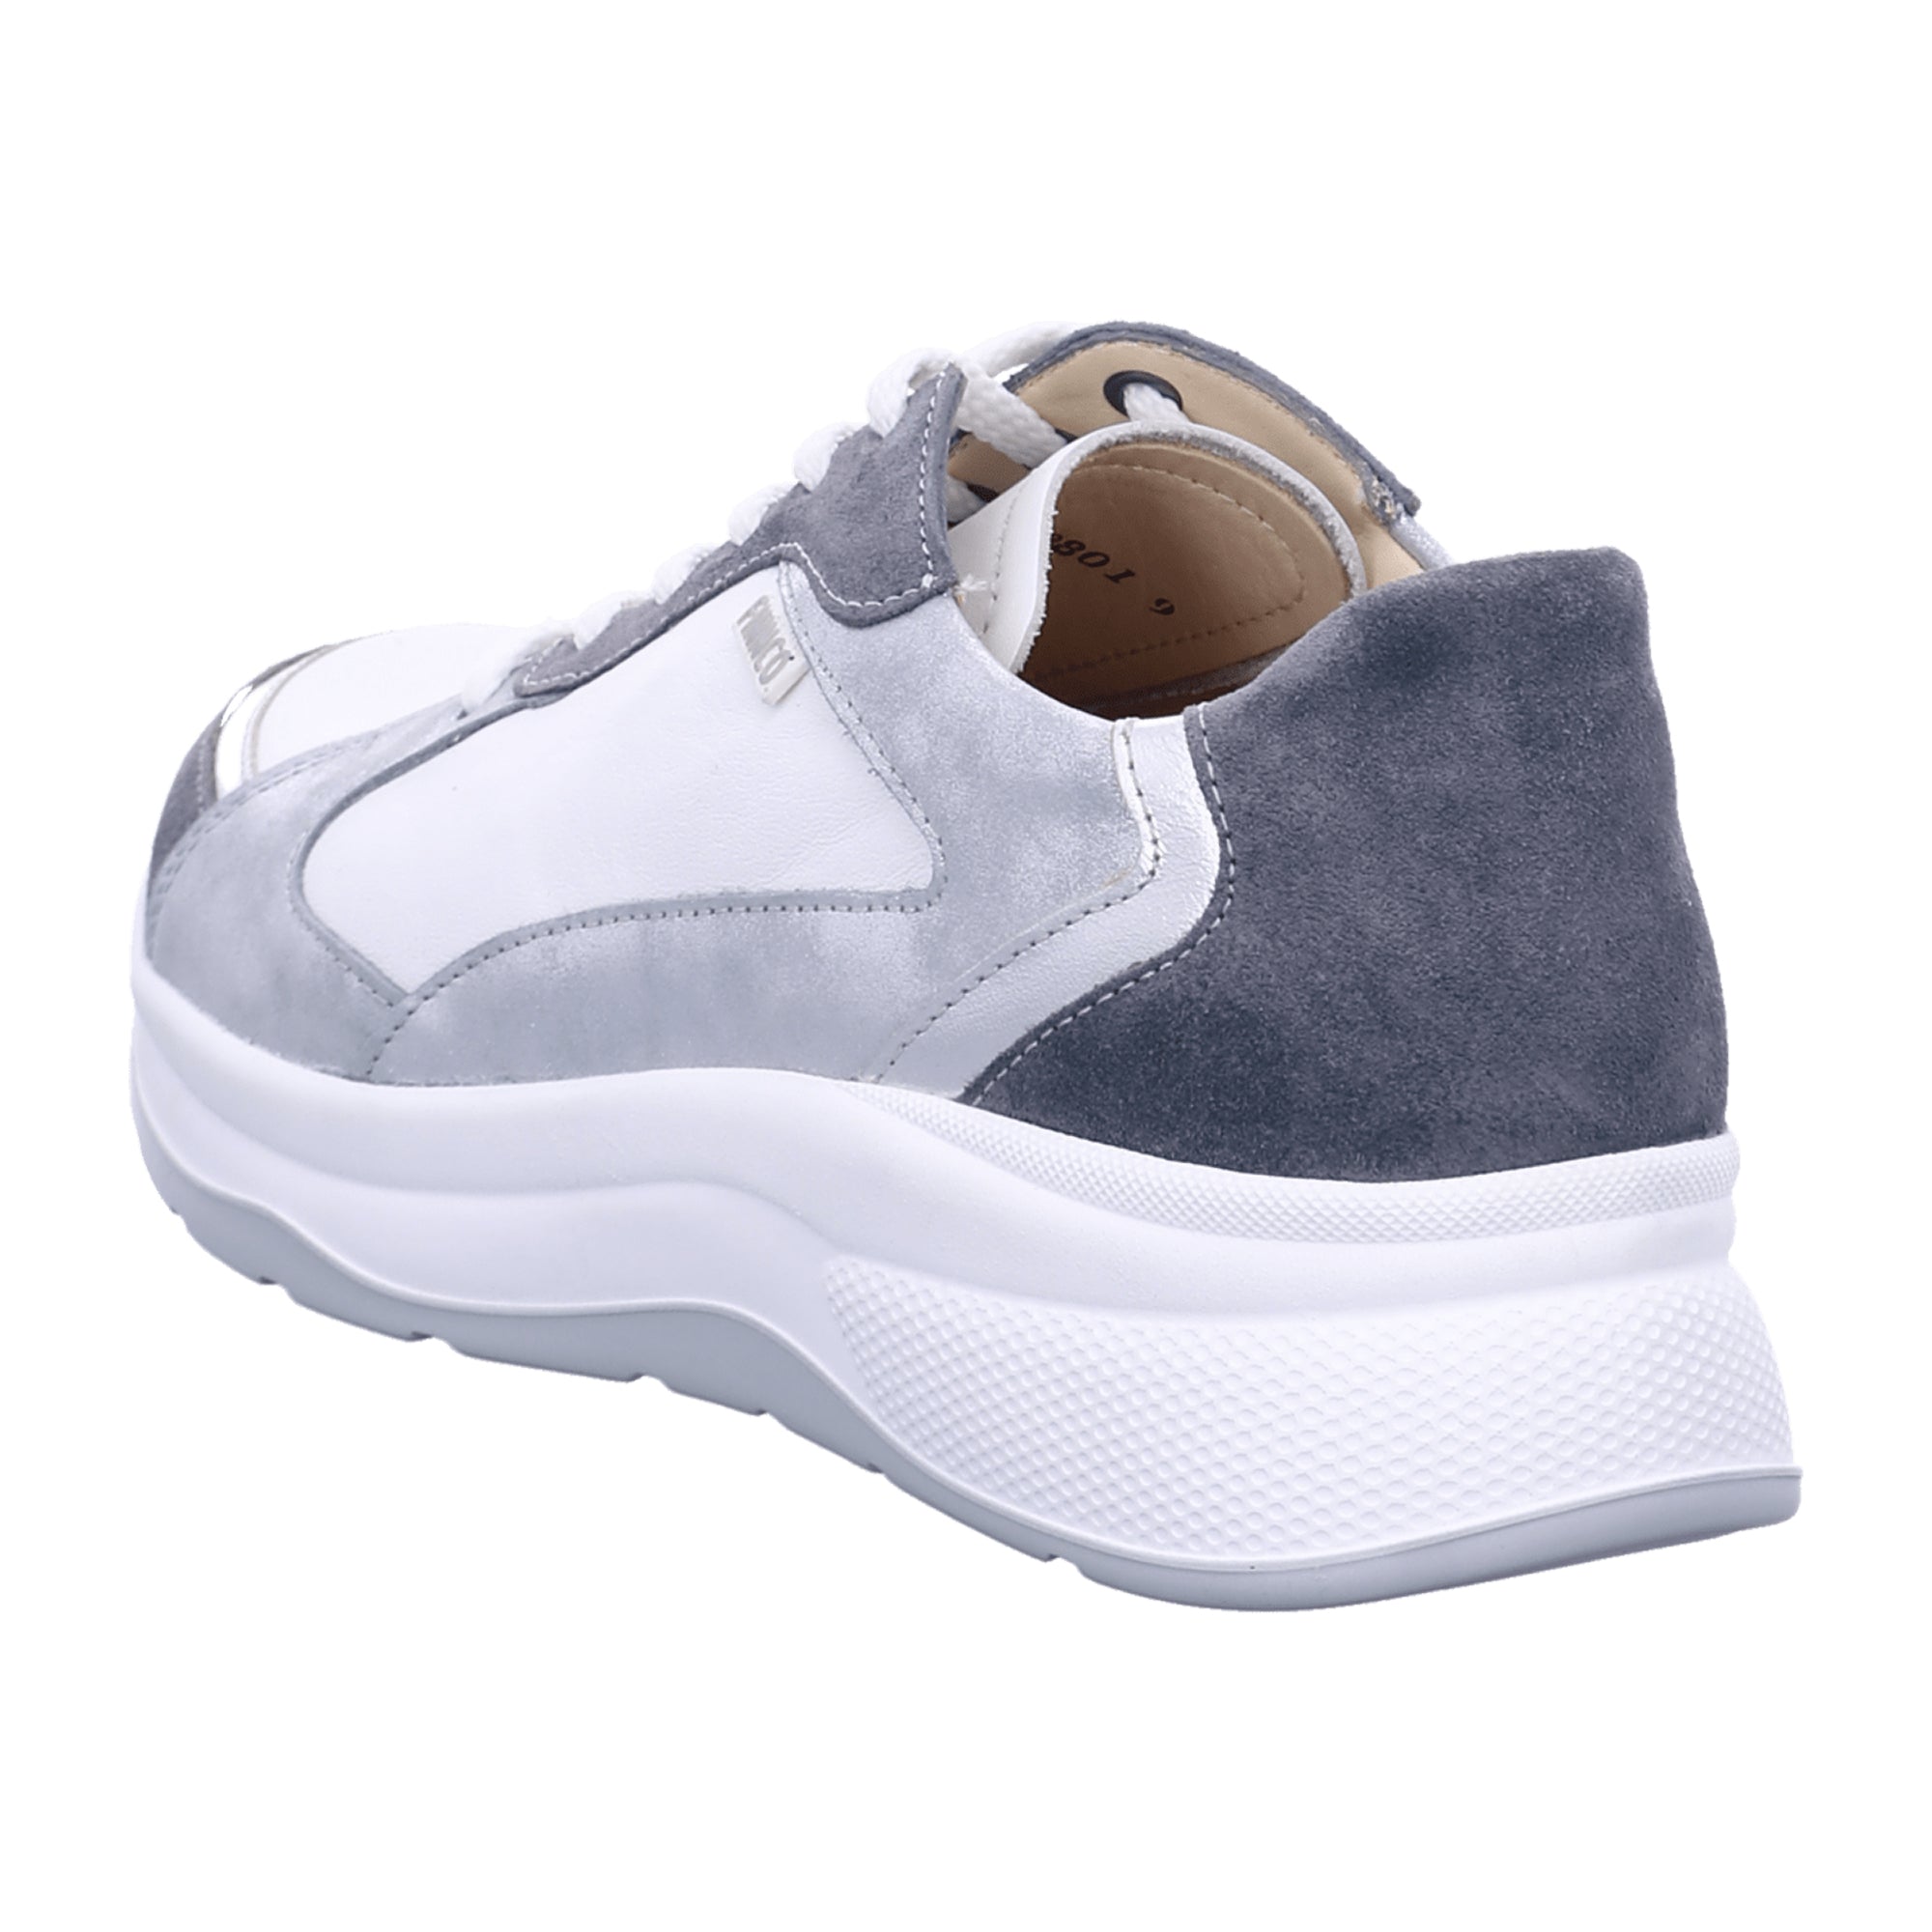 Finn Comfort Piccadilly Women's Comfort Sneakers White/Gray/Silver, Leather Lace-Up Designed for Optimal Fit